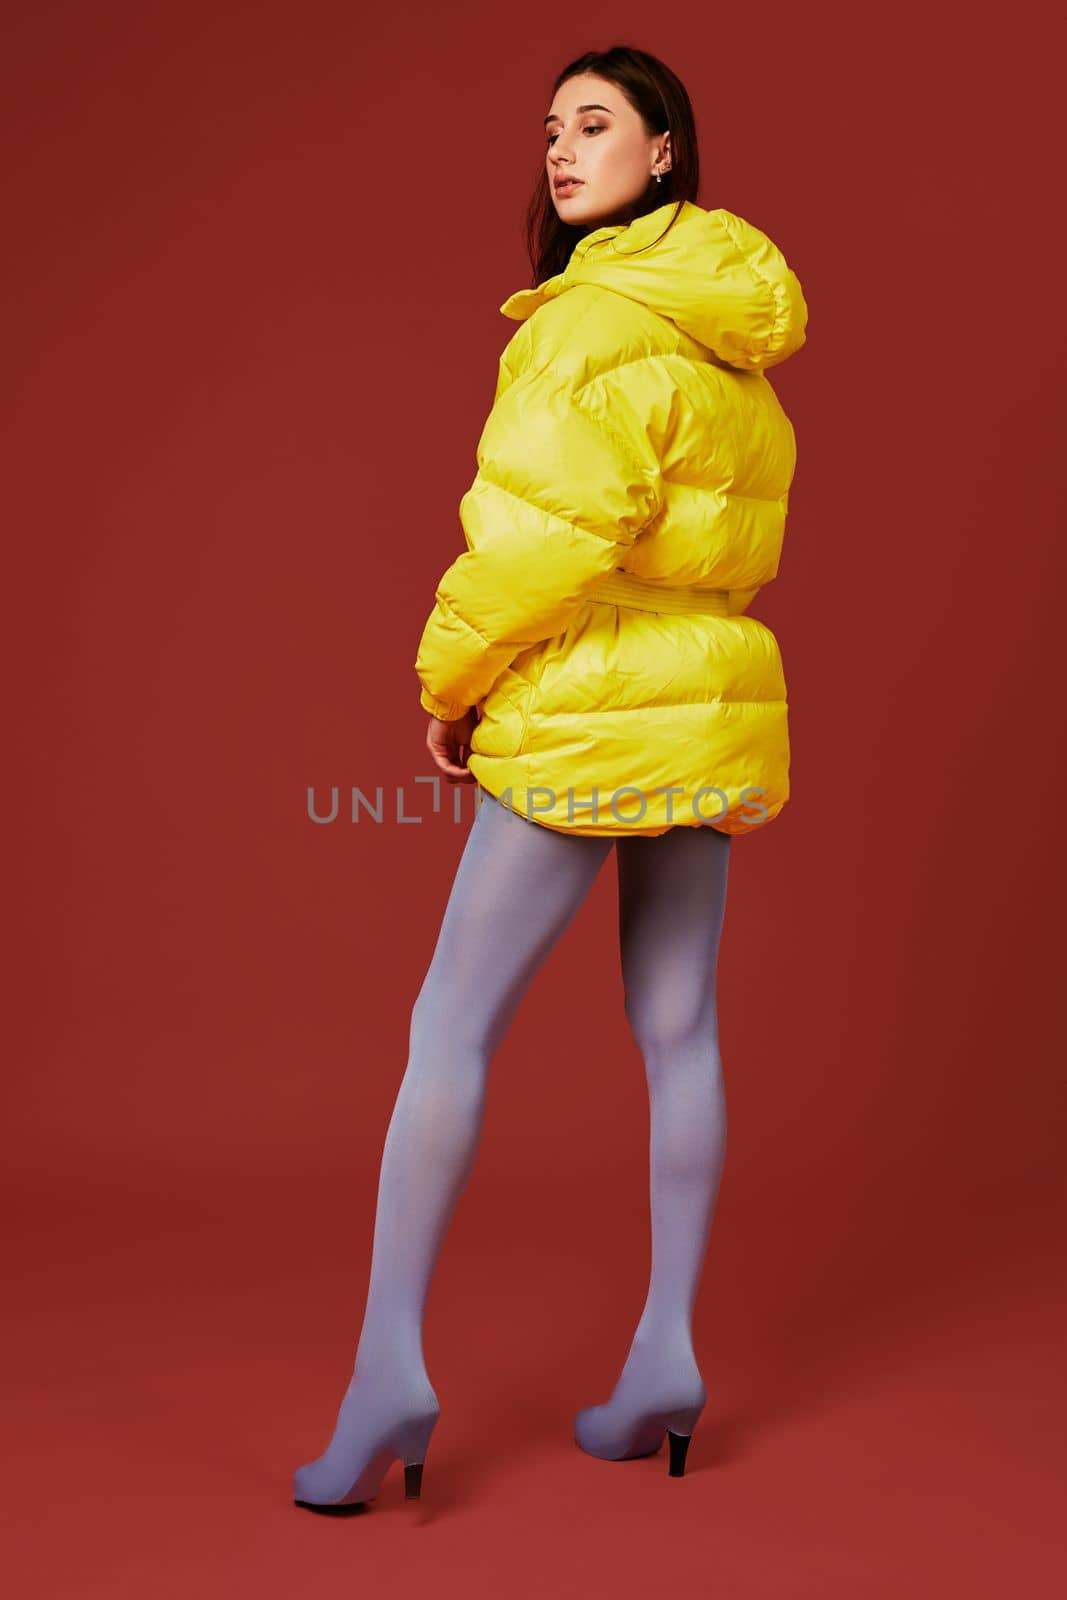 Image of young dark haired girl posing before camera in studio on red background. Fashion image of stylish woman wearing yellow jacket. Back view